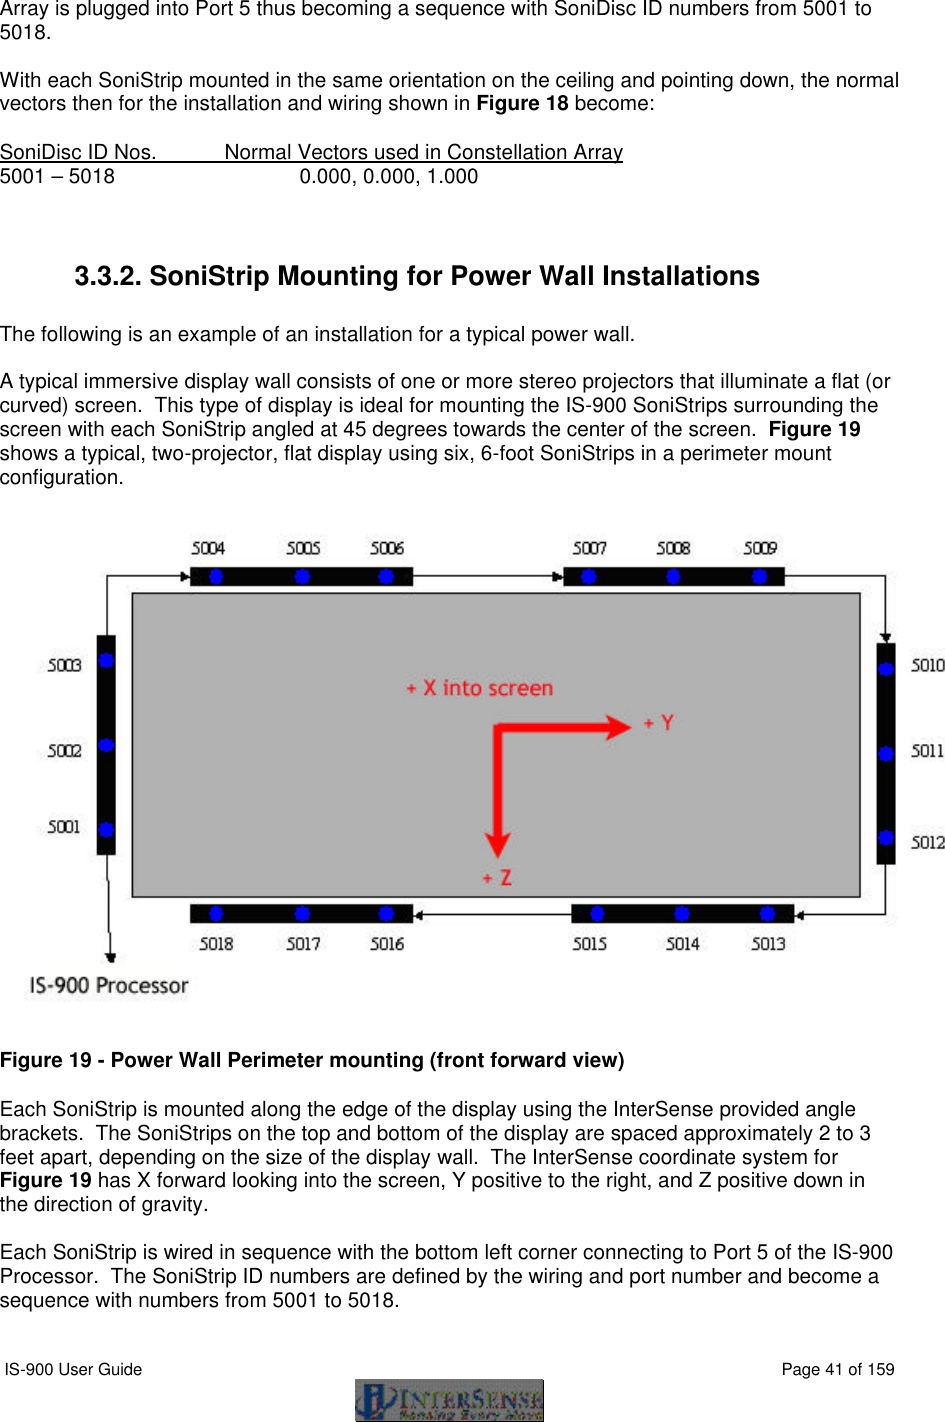  IS-900 User Guide                                                                                                                                          Page 41 of 159  Array is plugged into Port 5 thus becoming a sequence with SoniDisc ID numbers from 5001 to 5018.  With each SoniStrip mounted in the same orientation on the ceiling and pointing down, the normal vectors then for the installation and wiring shown in Figure 18 become:  SoniDisc ID Nos. Normal Vectors used in Constellation Array 5001 – 5018    0.000, 0.000, 1.000   3.3.2. SoniStrip Mounting for Power Wall Installations  The following is an example of an installation for a typical power wall.  A typical immersive display wall consists of one or more stereo projectors that illuminate a flat (or curved) screen.  This type of display is ideal for mounting the IS-900 SoniStrips surrounding the screen with each SoniStrip angled at 45 degrees towards the center of the screen.  Figure 19 shows a typical, two-projector, flat display using six, 6-foot SoniStrips in a perimeter mount configuration.     Figure 19 - Power Wall Perimeter mounting (front forward view)  Each SoniStrip is mounted along the edge of the display using the InterSense provided angle brackets.  The SoniStrips on the top and bottom of the display are spaced approximately 2 to 3 feet apart, depending on the size of the display wall.  The InterSense coordinate system for Figure 19 has X forward looking into the screen, Y positive to the right, and Z positive down in the direction of gravity.    Each SoniStrip is wired in sequence with the bottom left corner connecting to Port 5 of the IS-900 Processor.  The SoniStrip ID numbers are defined by the wiring and port number and become a sequence with numbers from 5001 to 5018.  